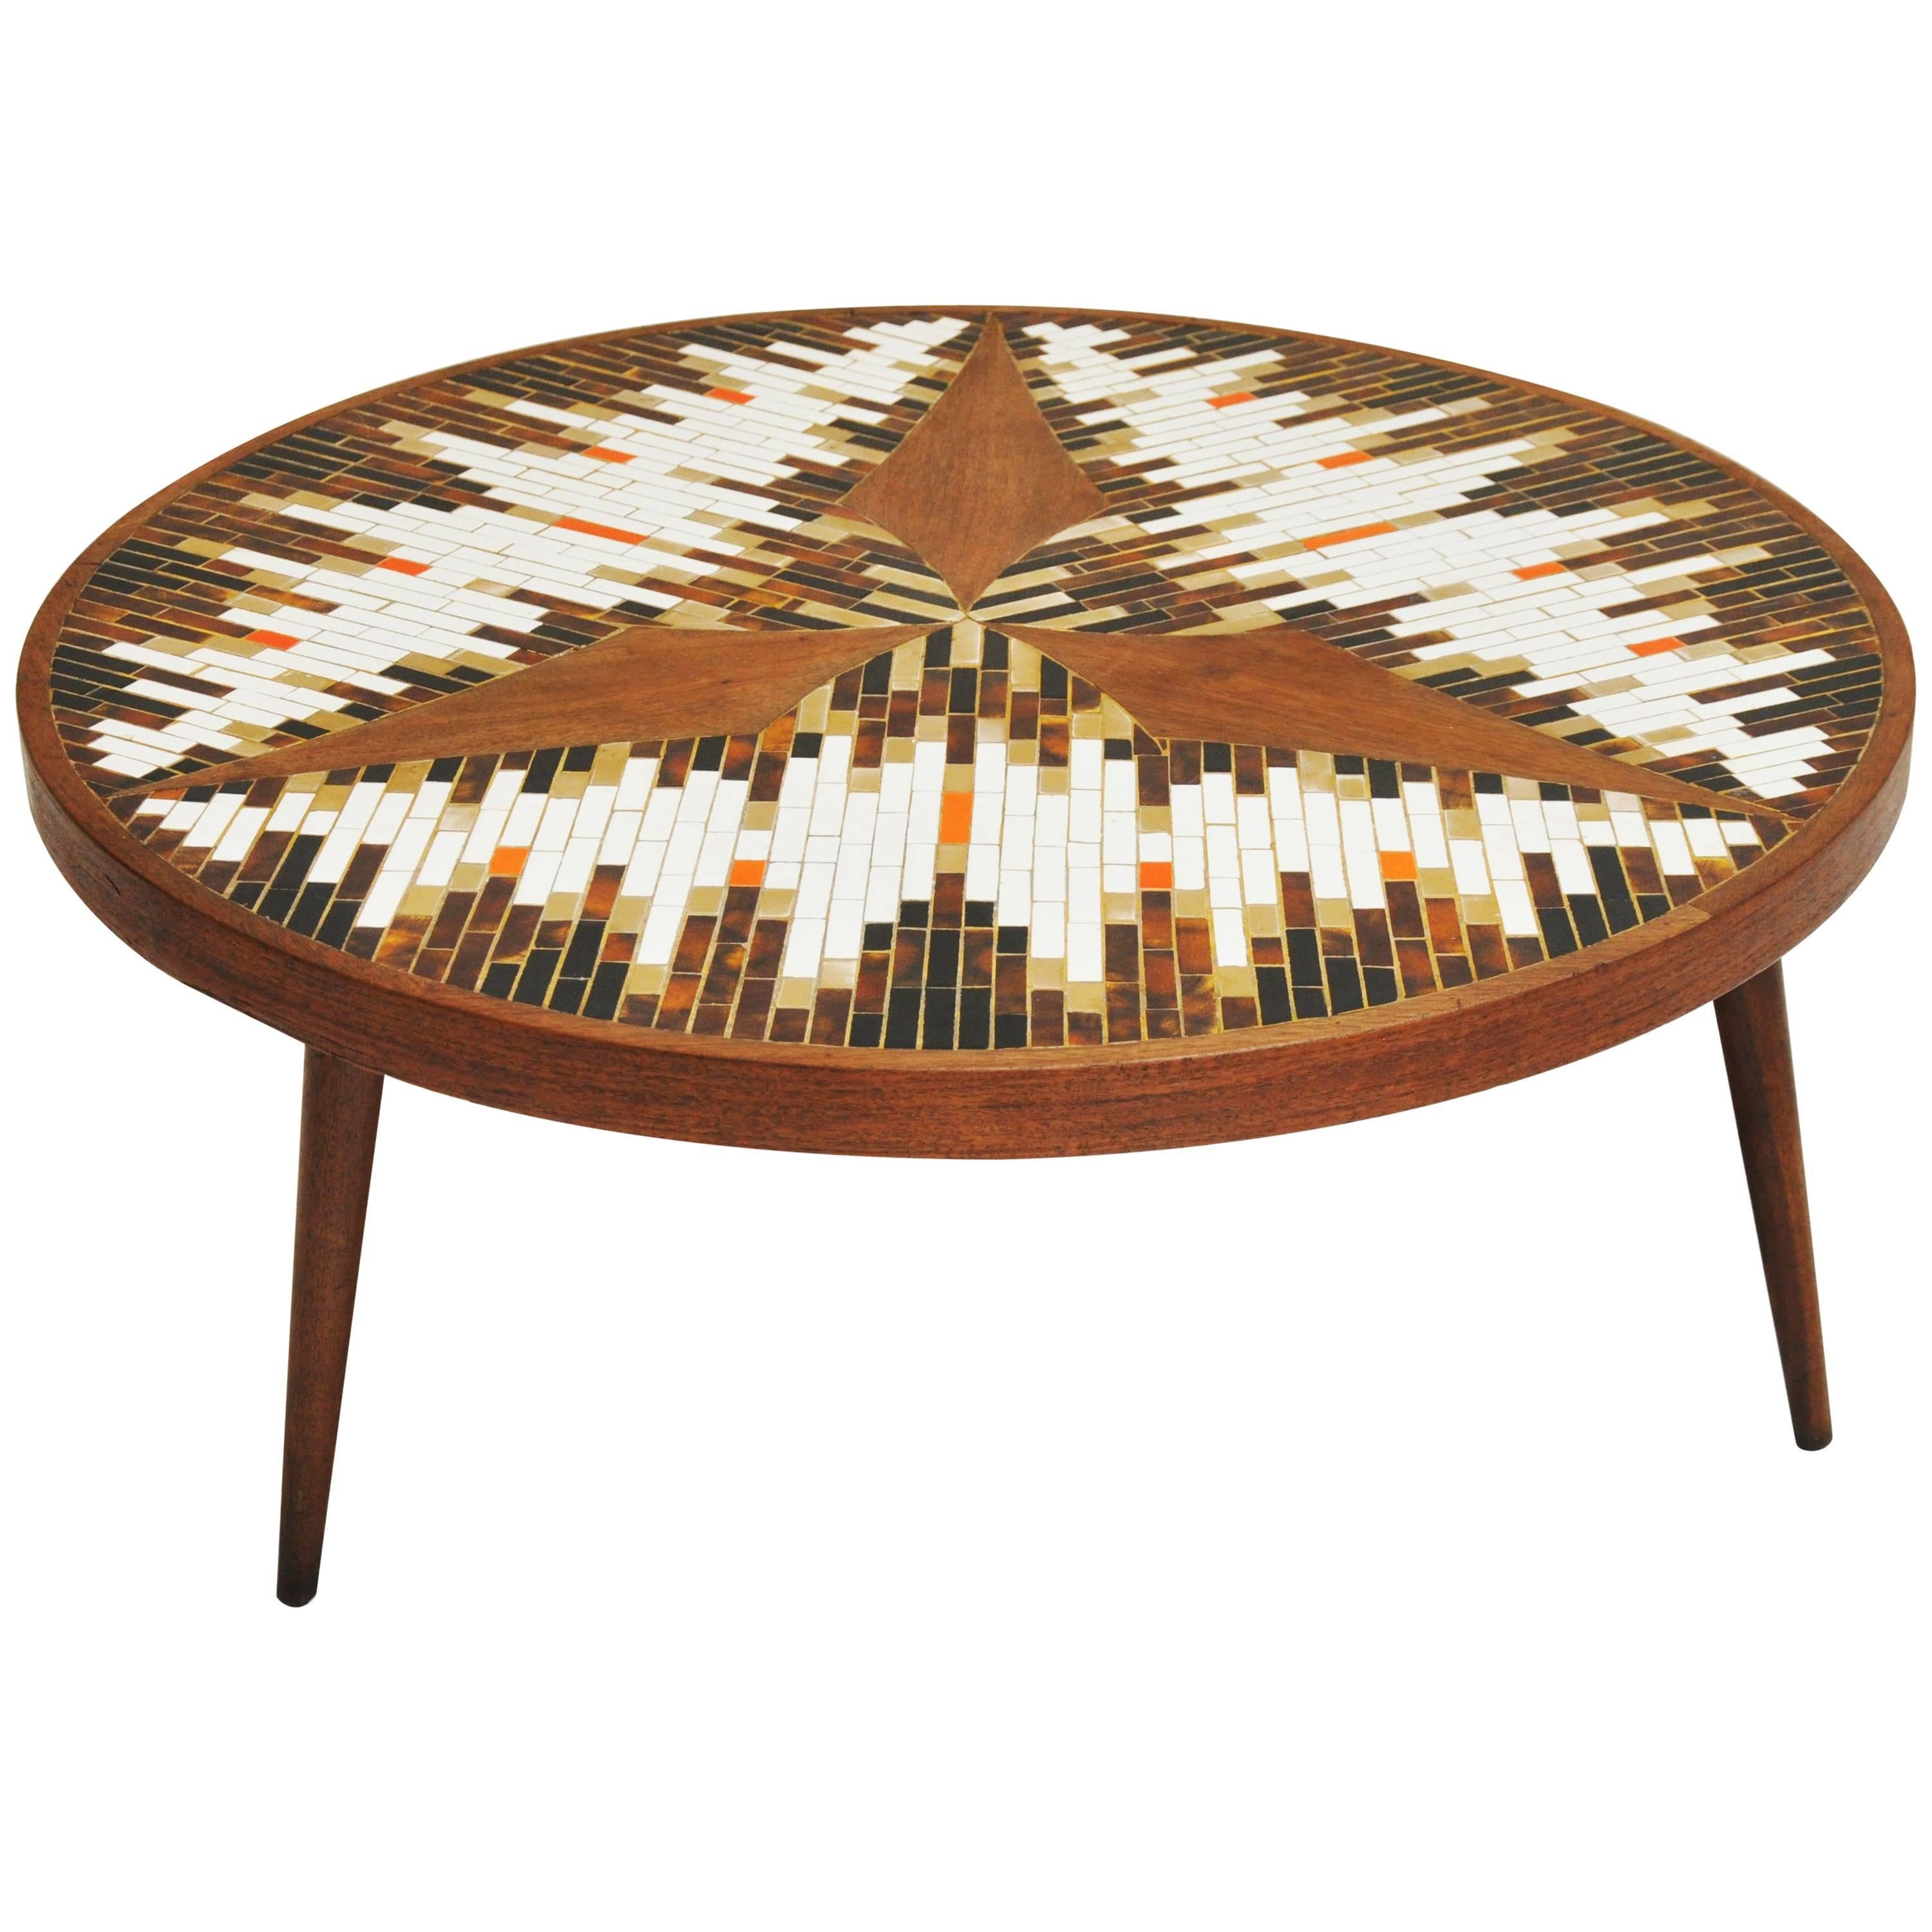 Tiled Coffee Table by Richard Hohenberg